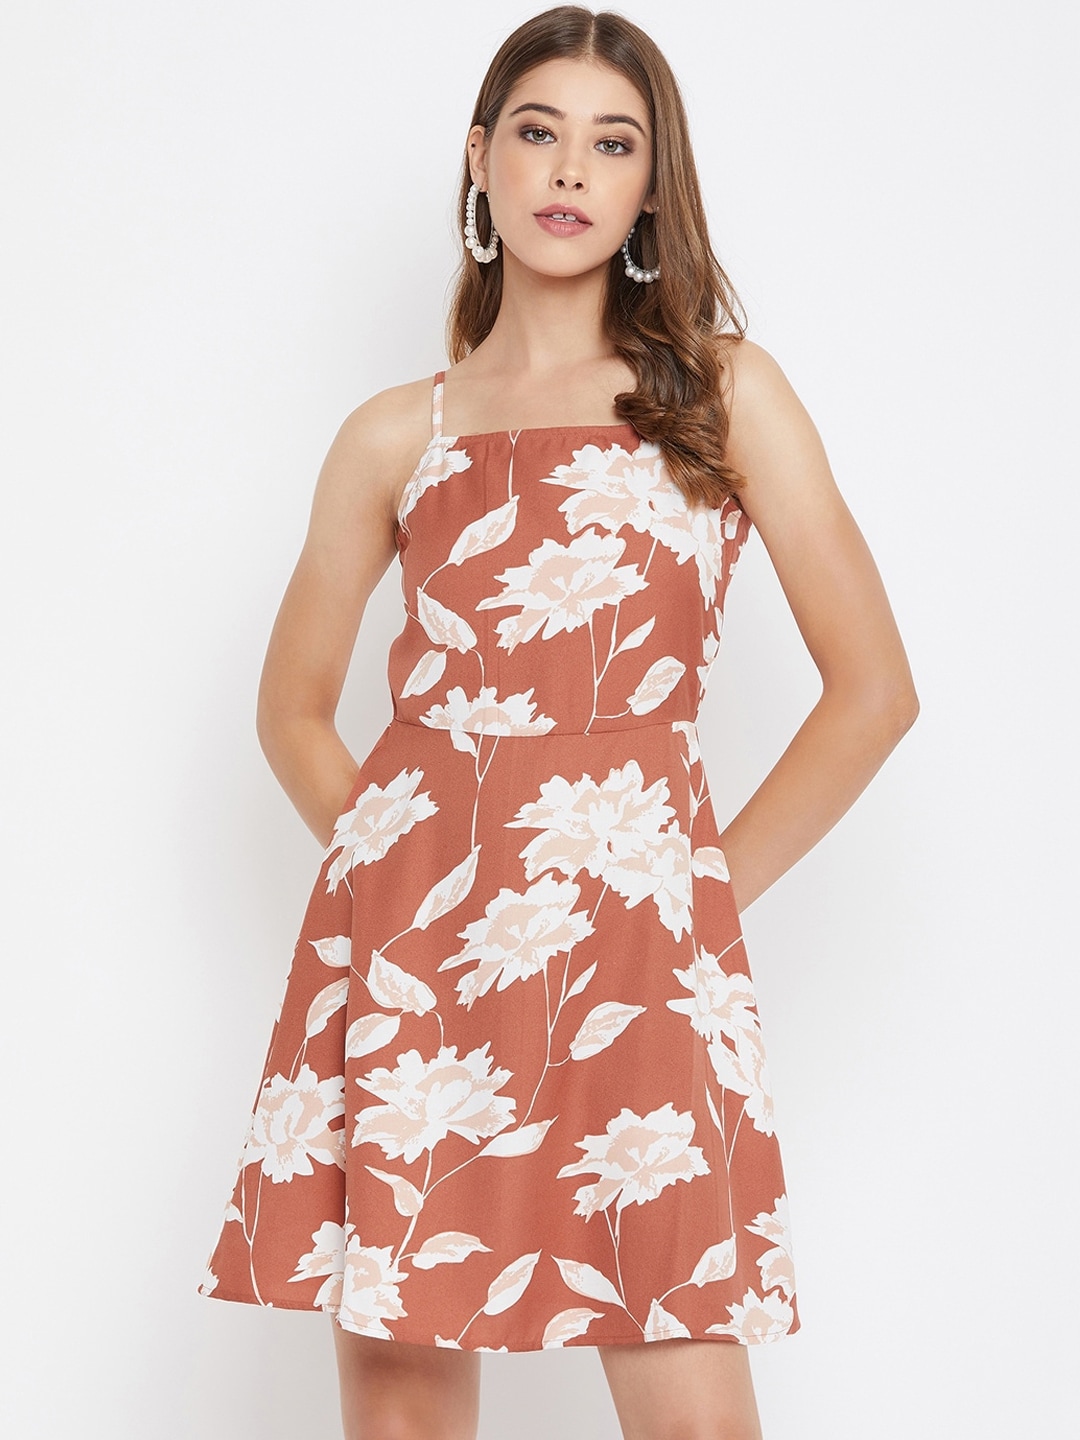 Berrylush Women Brown & White Floral Print Fit and Flare Dress